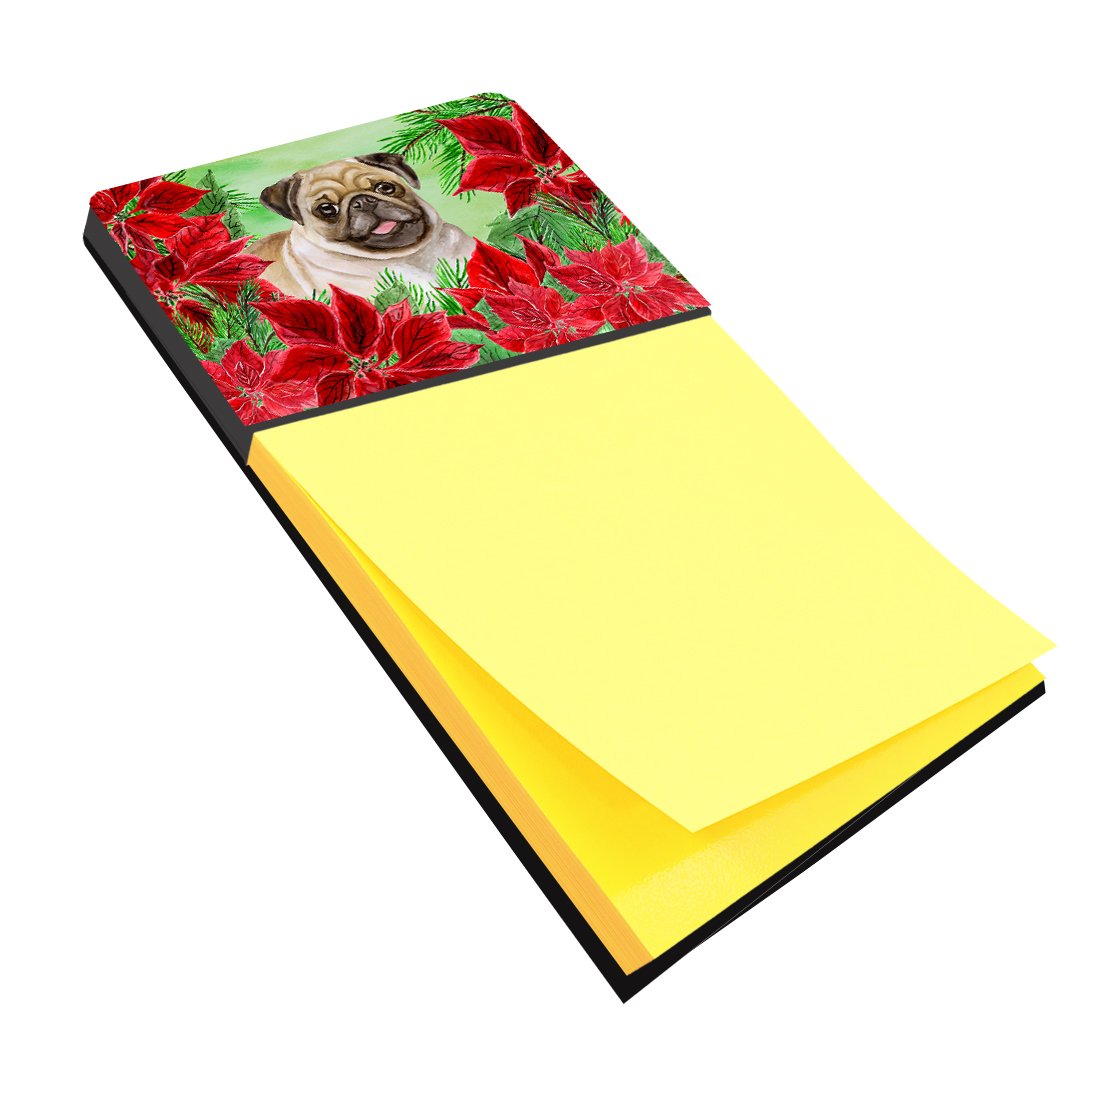 Fawn Pug Poinsettas Sticky Note Holder CK1365SN by Caroline's Treasures